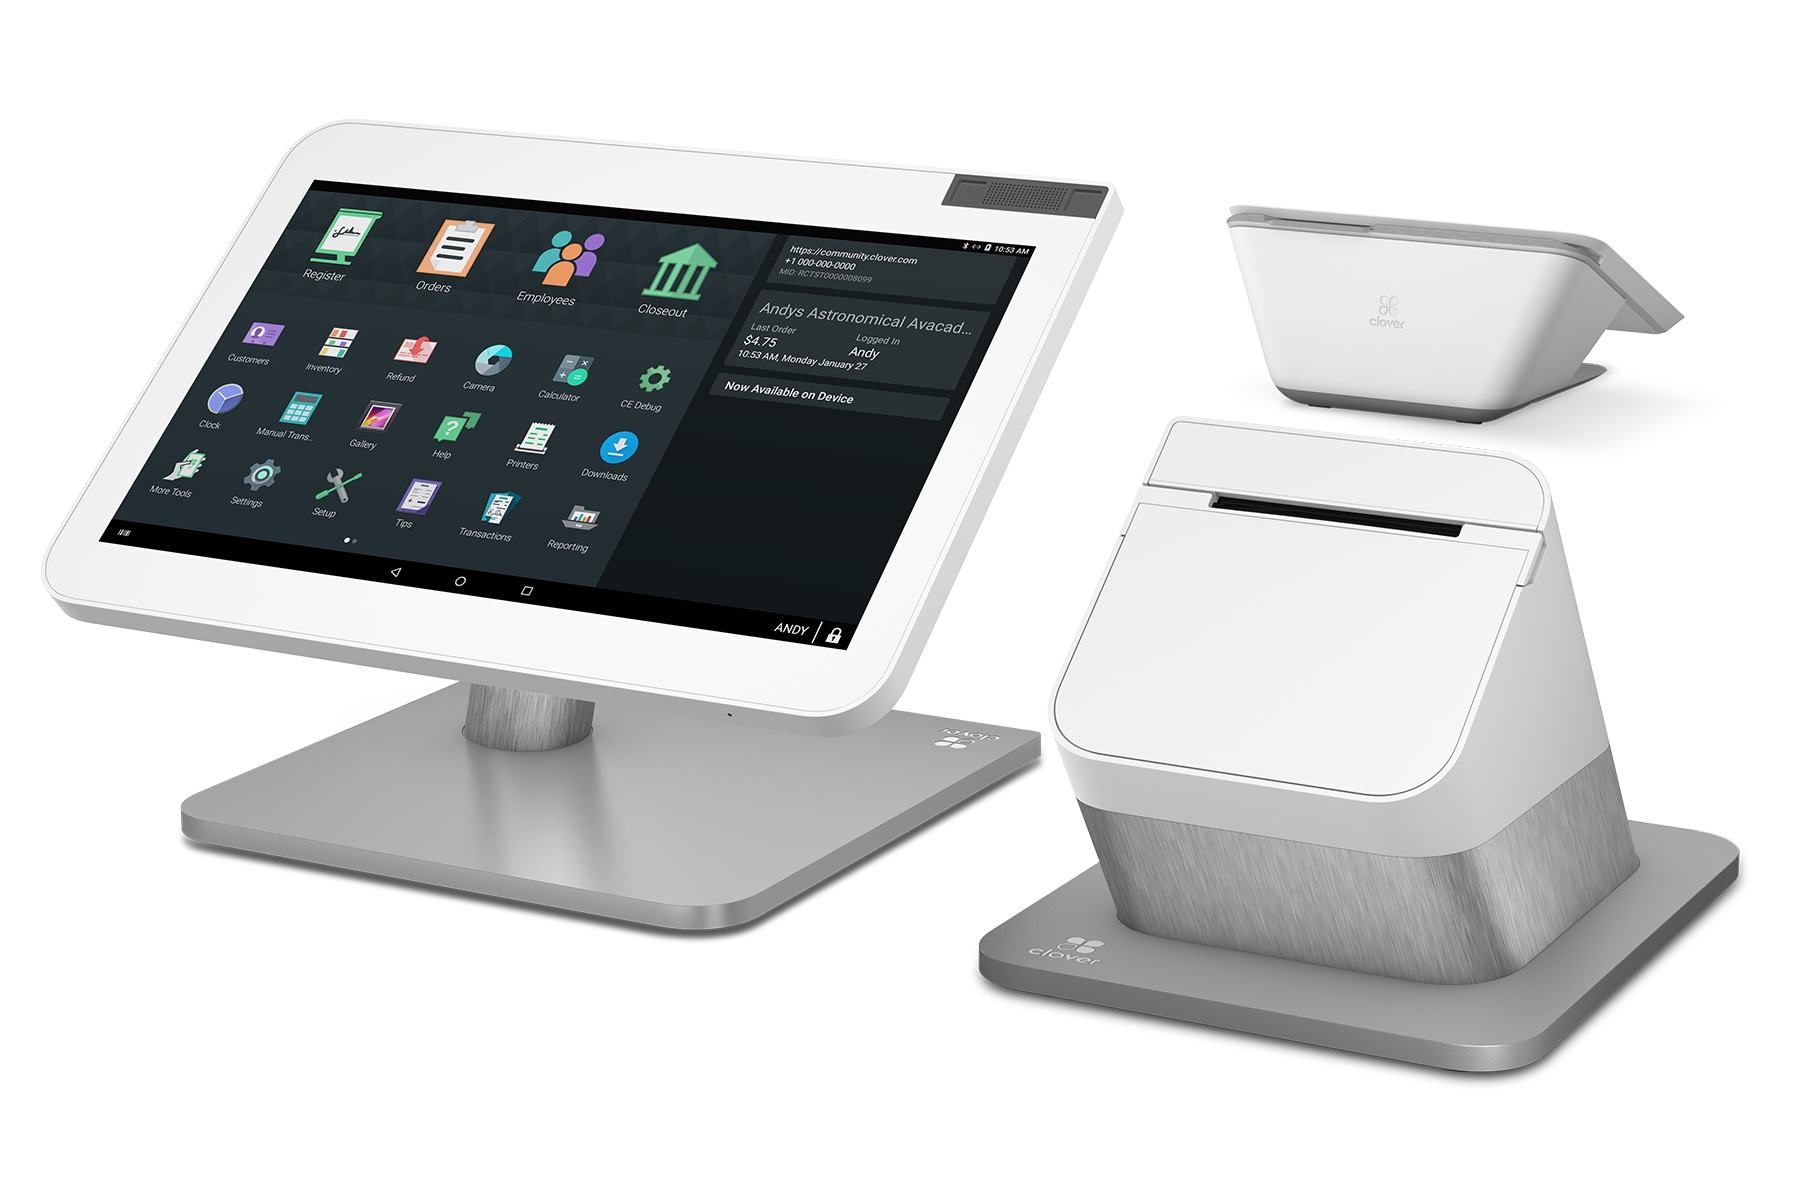 Clover Station Duo POS